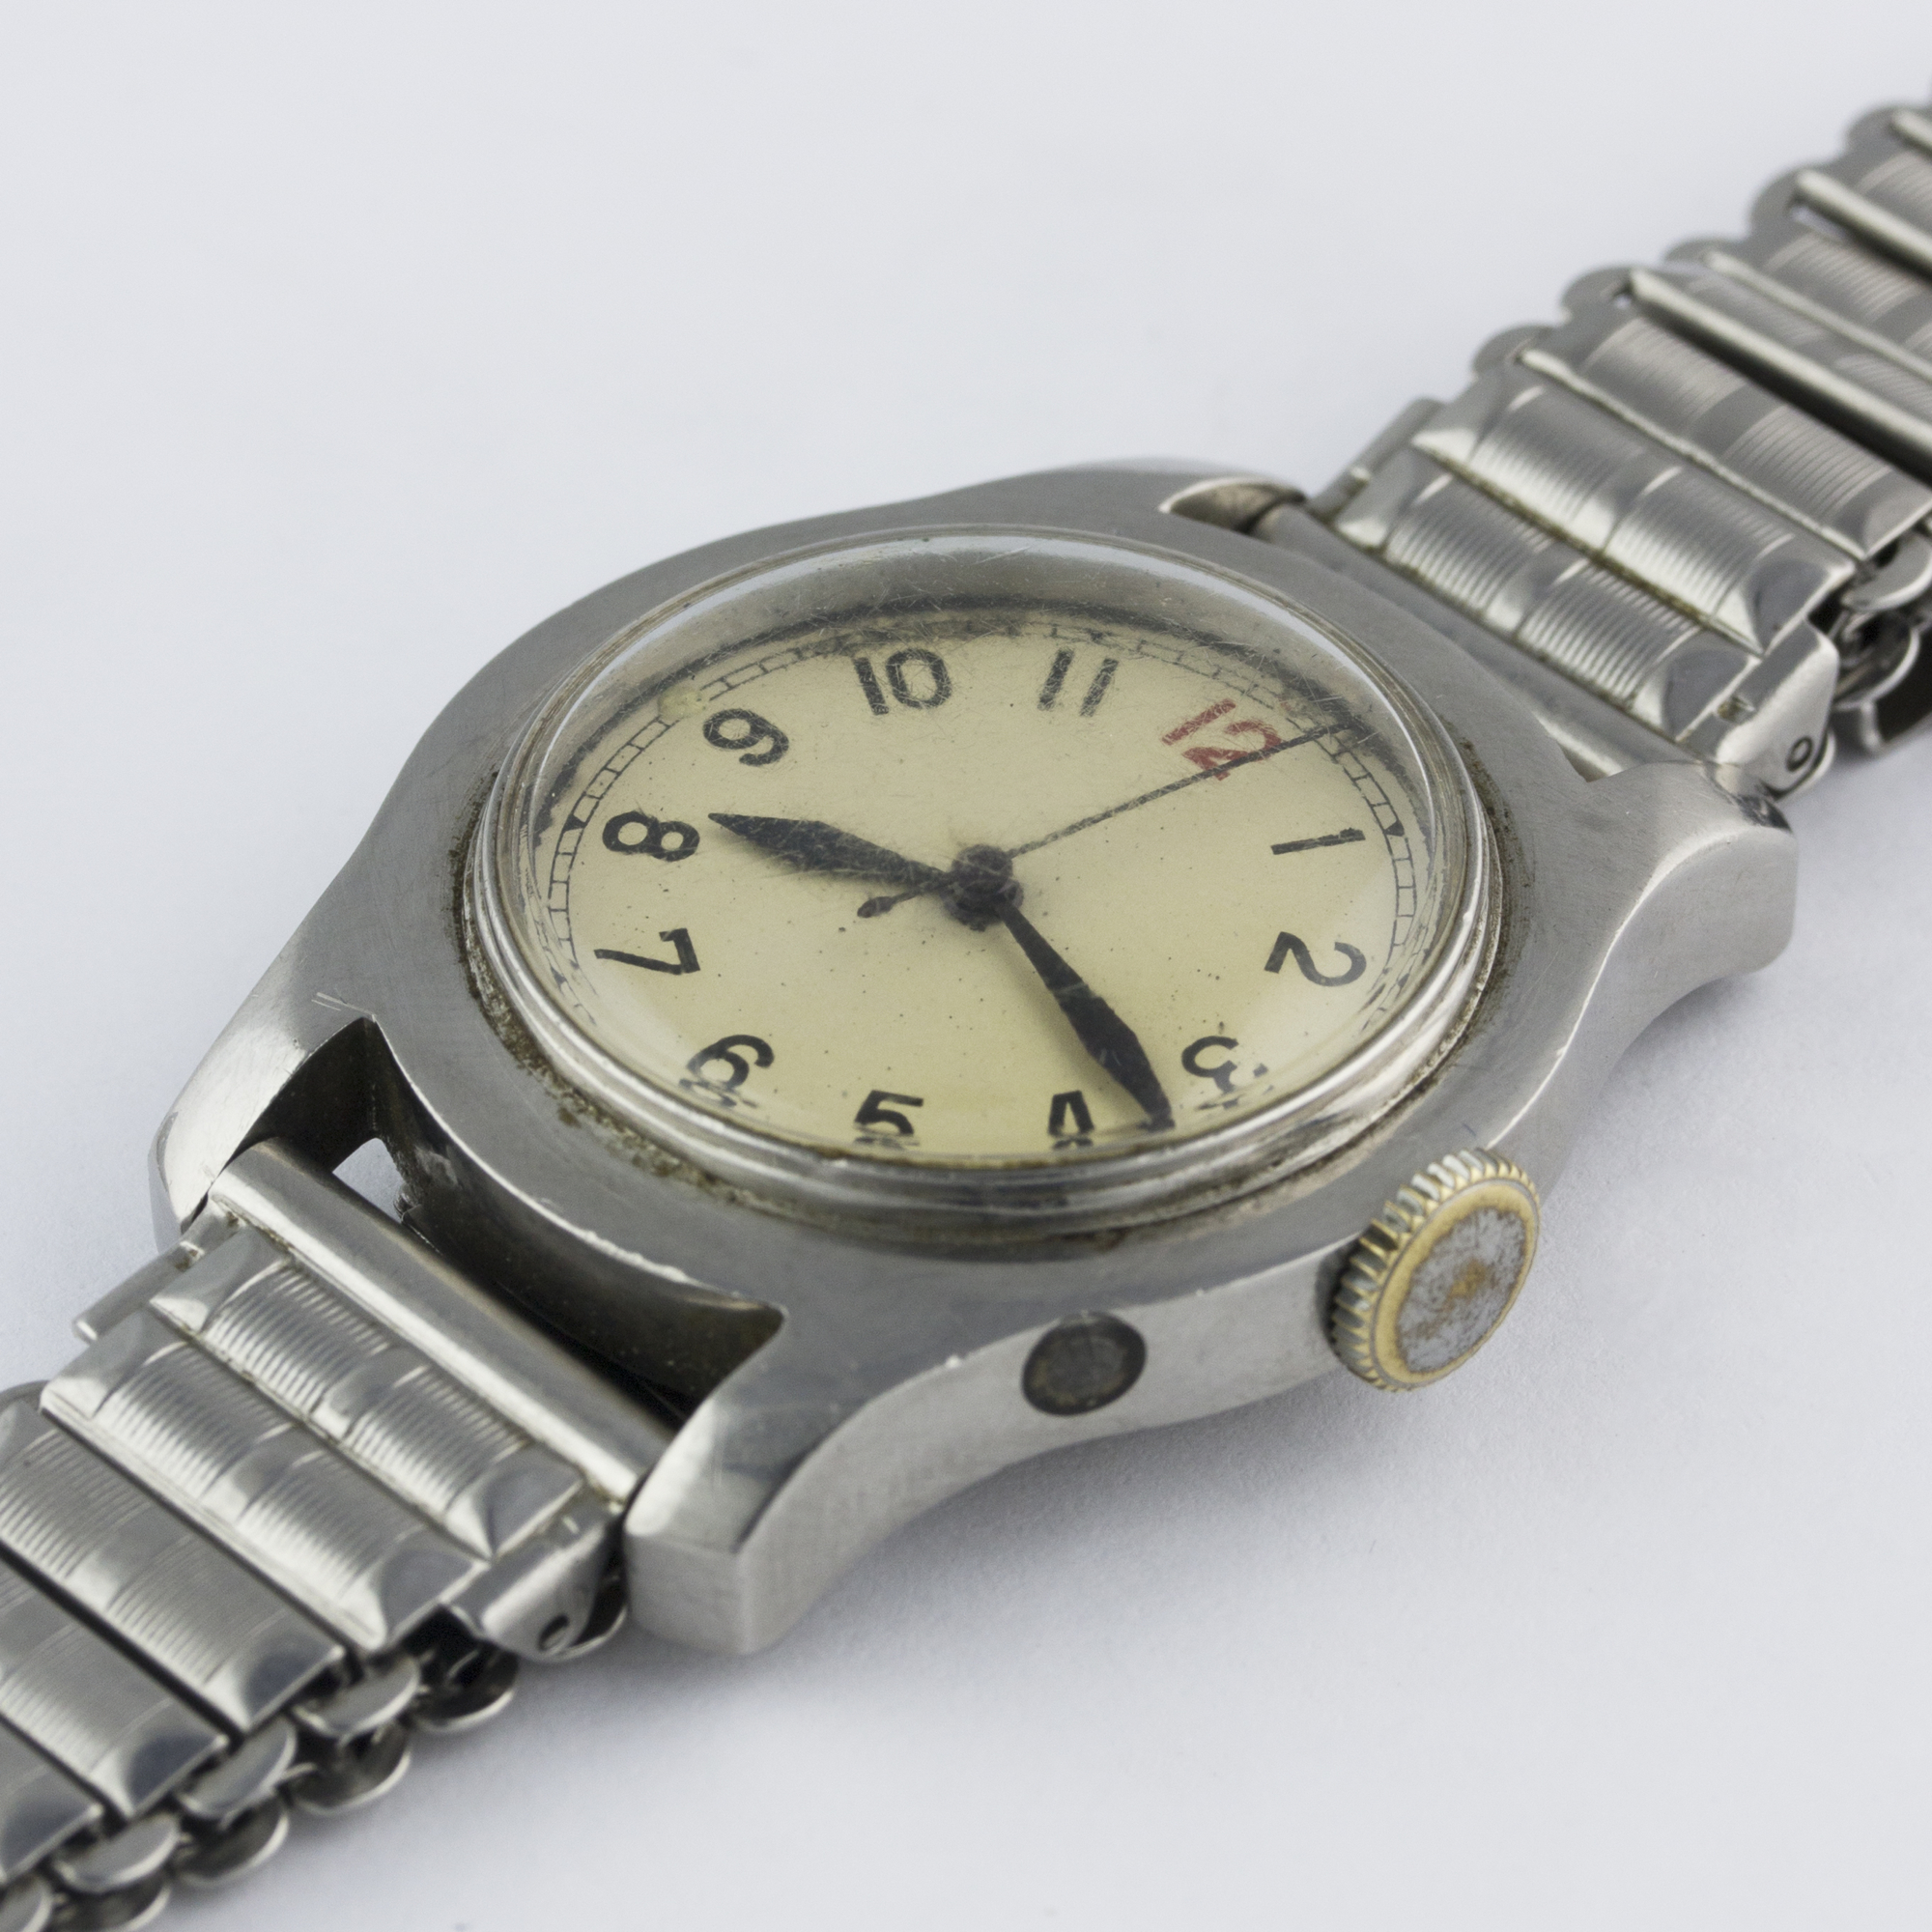 A GENTLEMAN'S STAINLESS STEEL BRITISH MILITARY RAF JAEGER LECOULTRE WEEMS AVIATORS BRACELET WATCH - Image 3 of 8